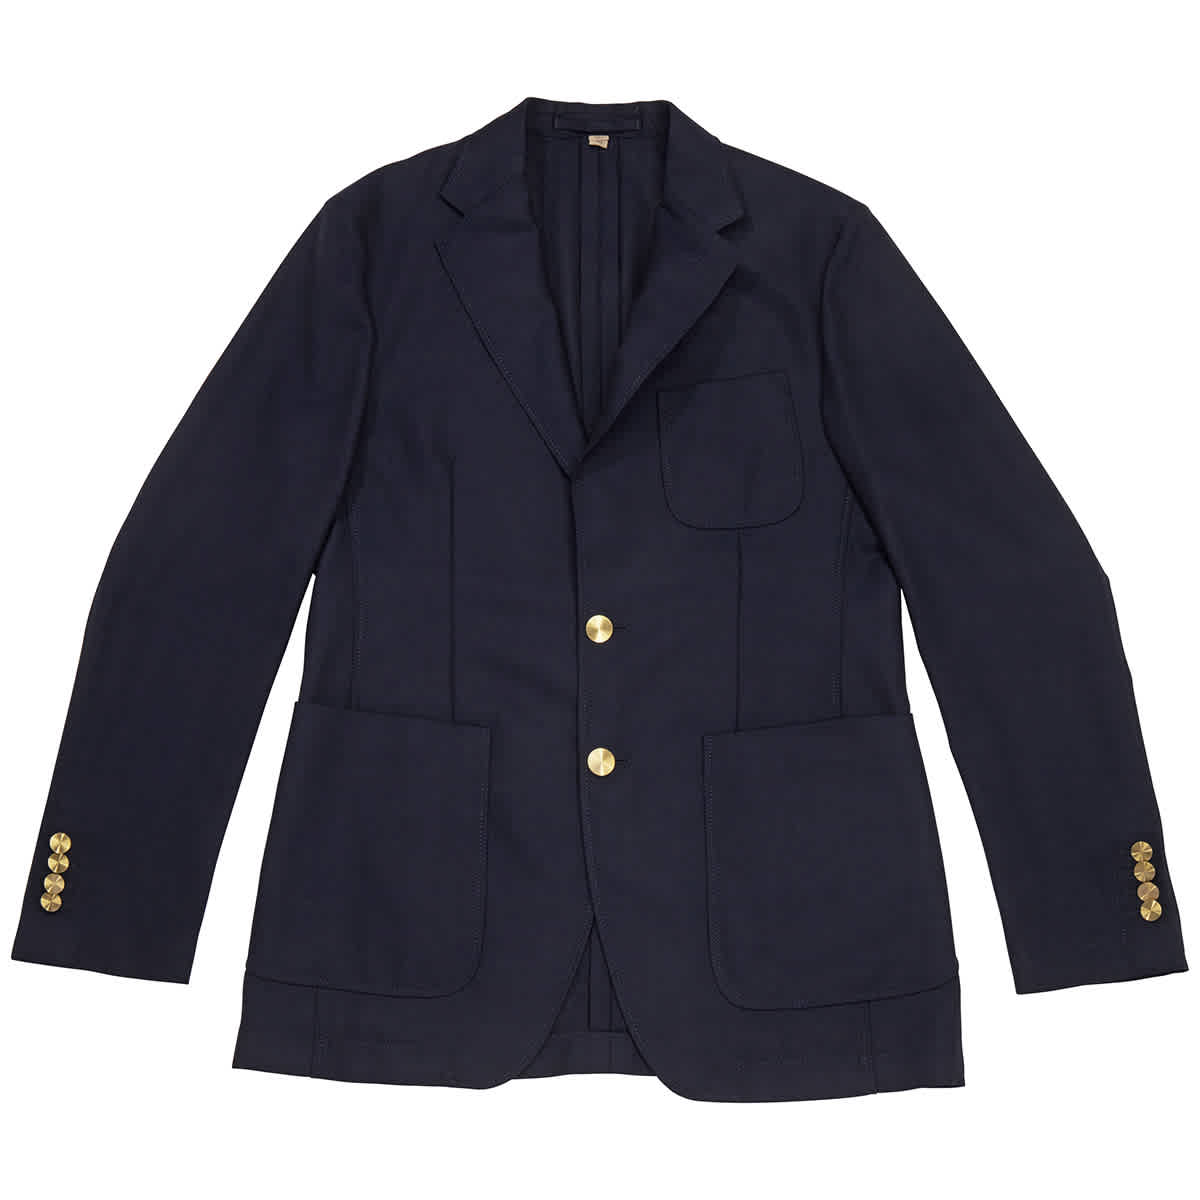 Burberry Mens Navy Stirling Wool Jacket